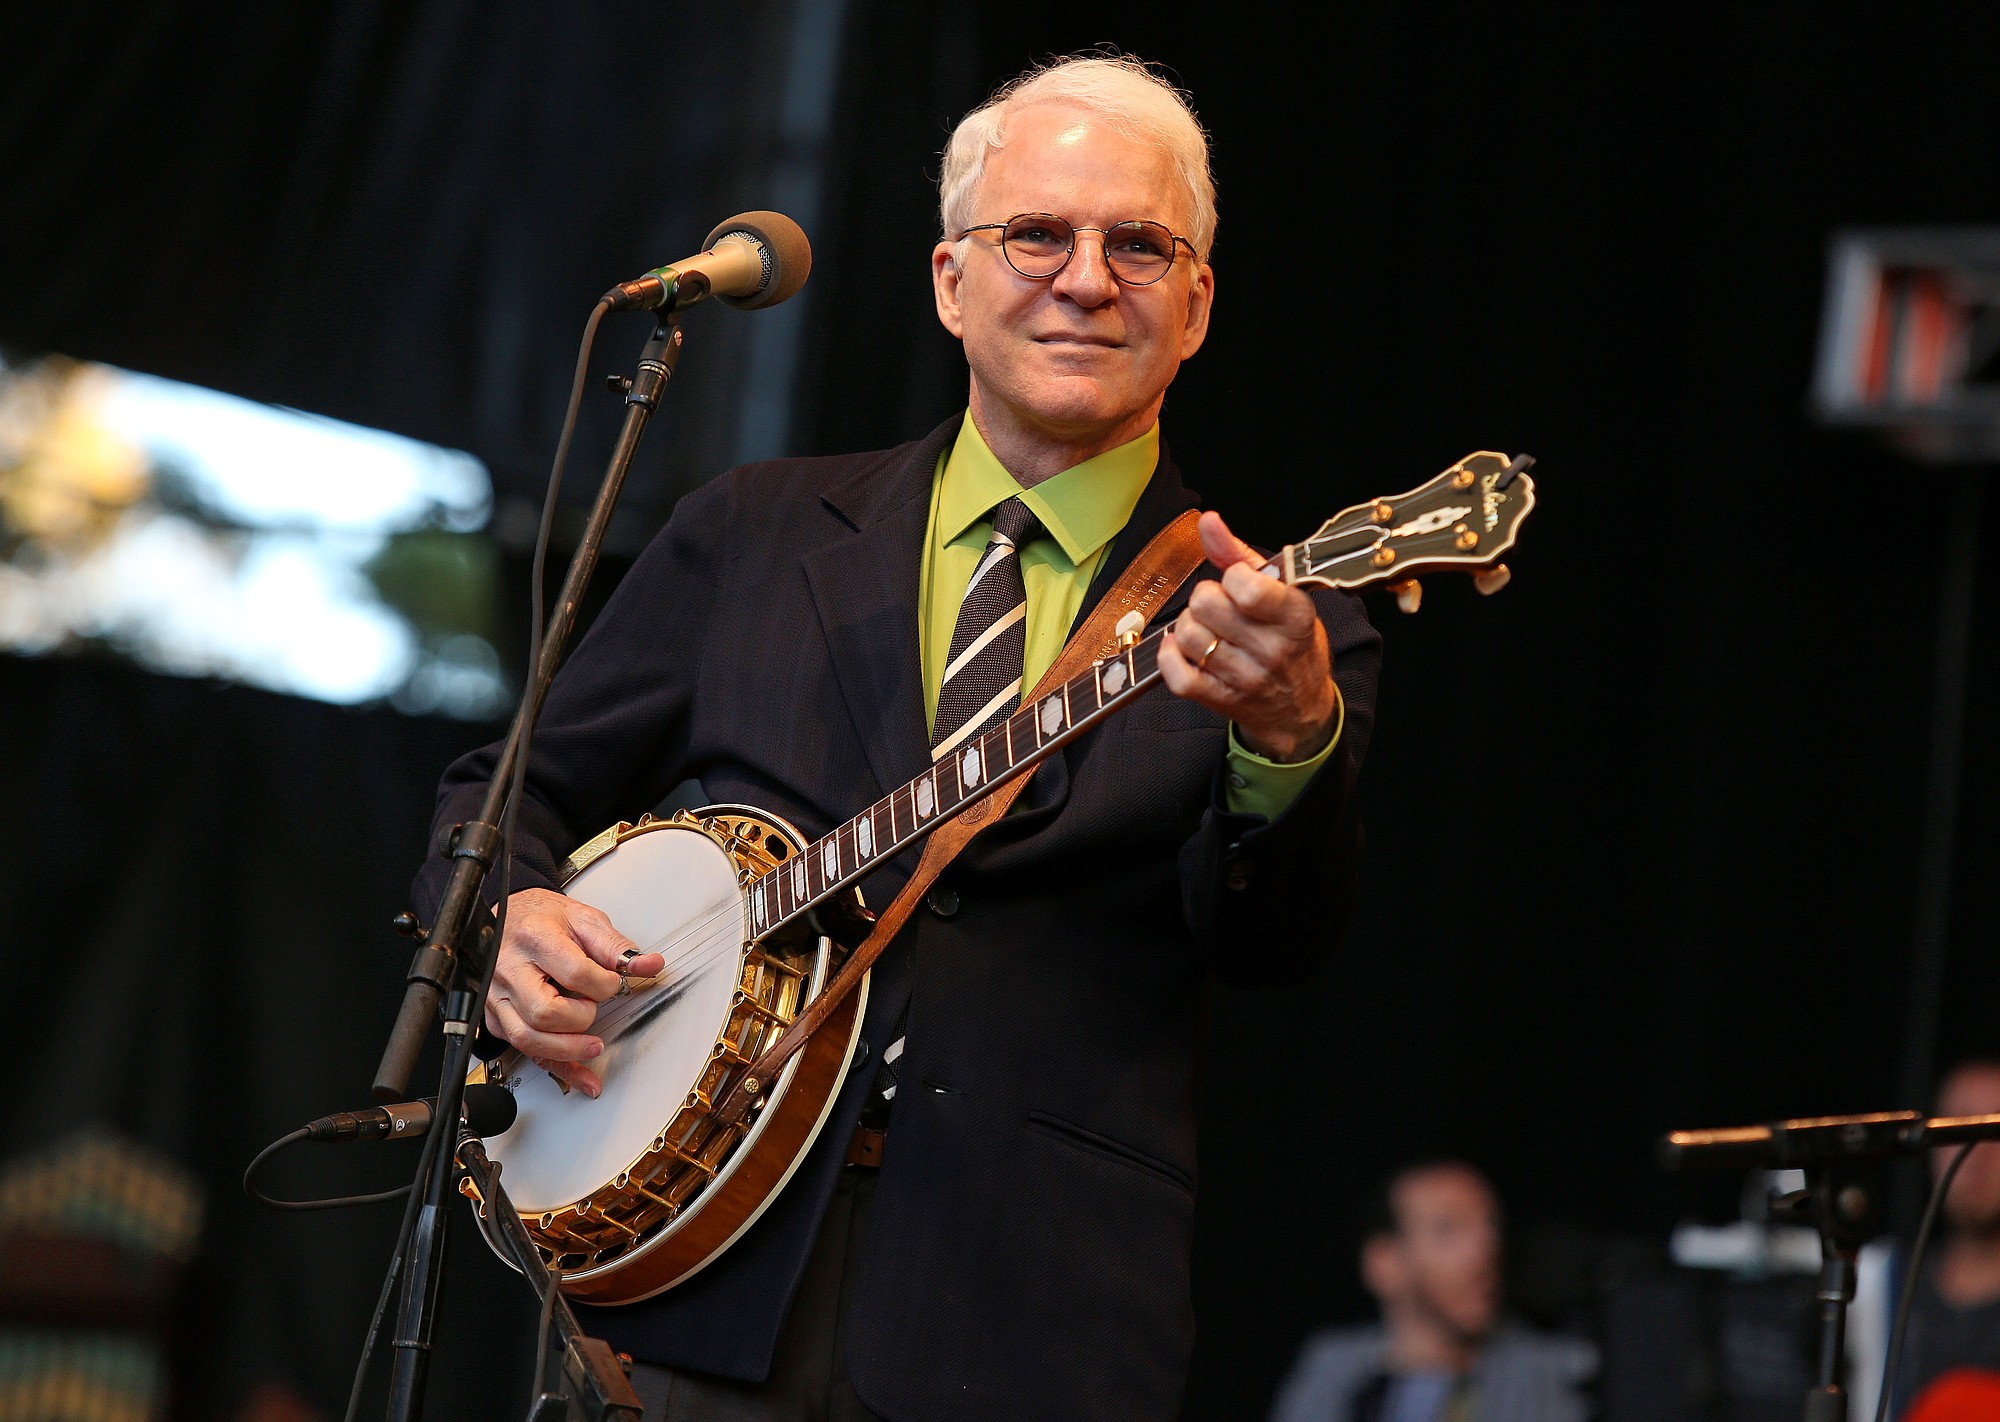 Invision files
Steve Martin will be honored by the International Bluegrass Music Association with a distinguished achievement award.